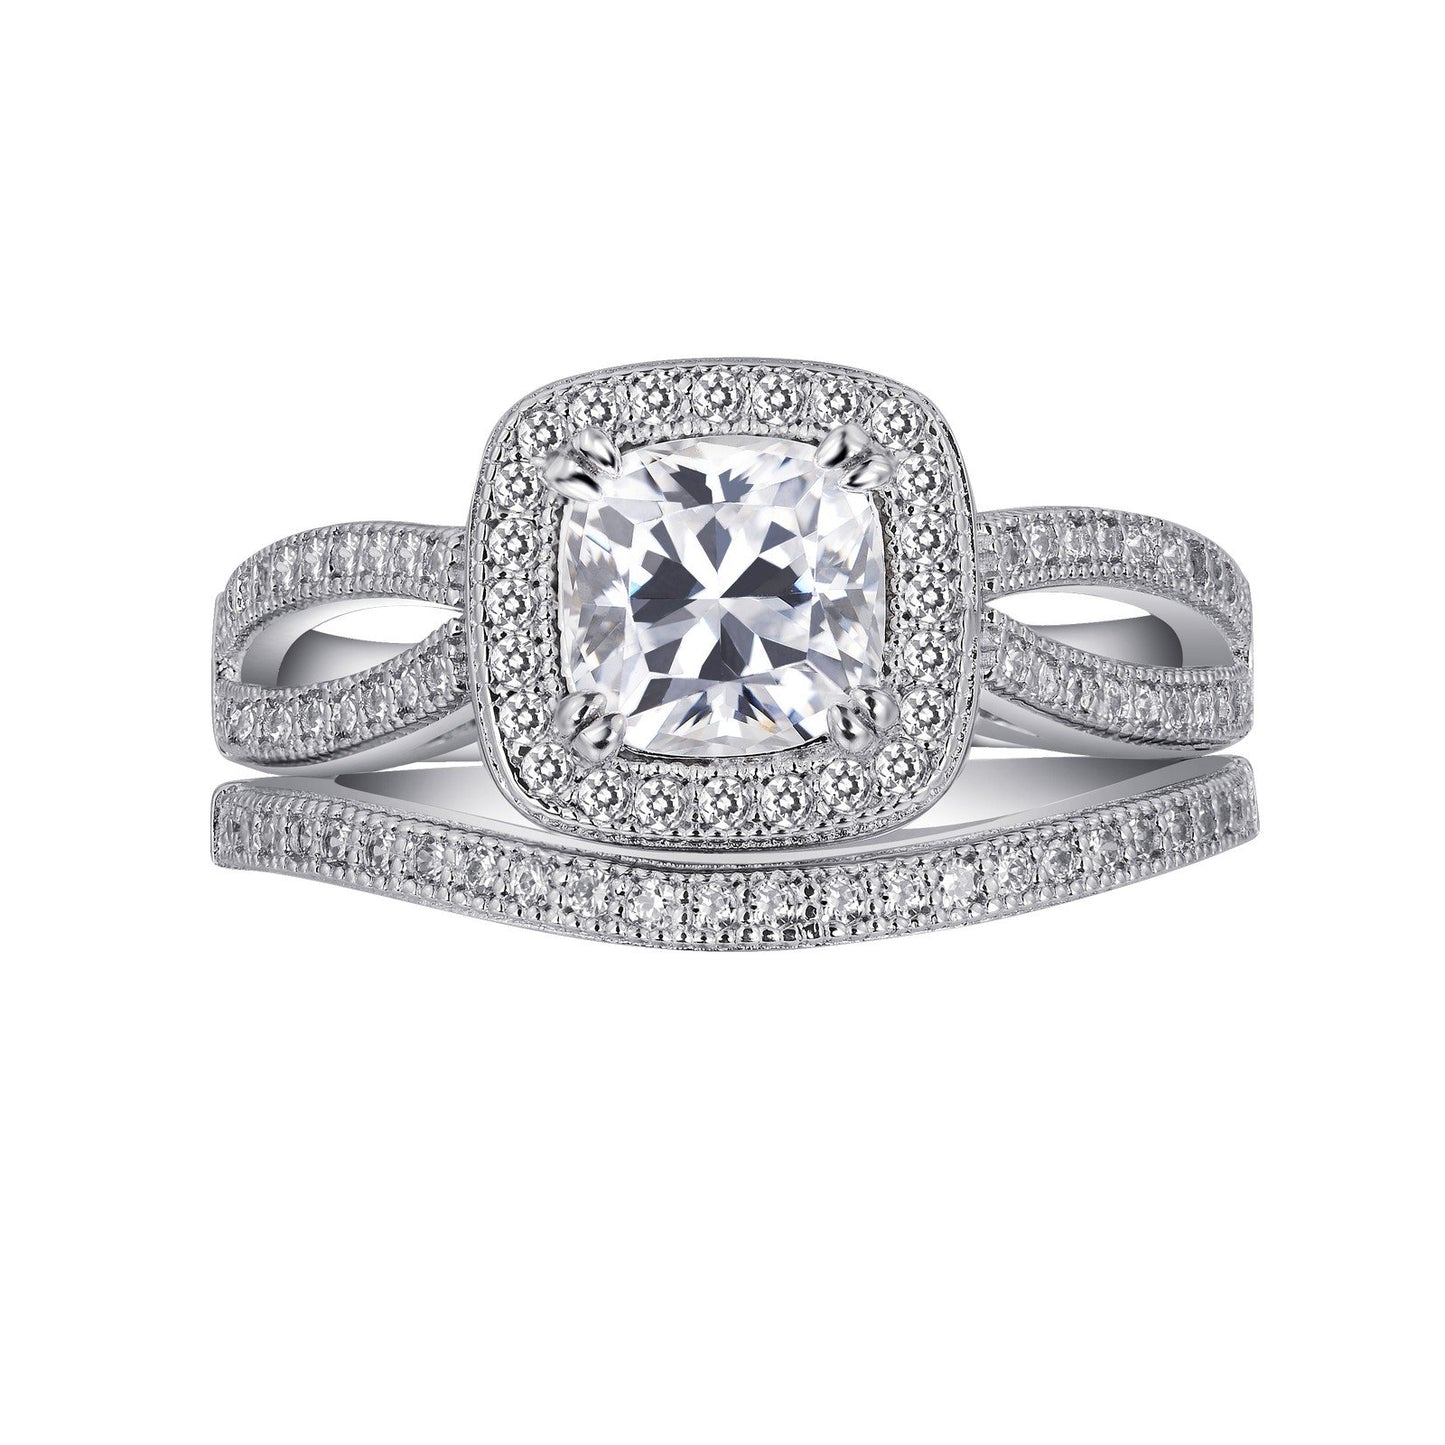 LaFonn Platinum Simulated Diamond  6.00mm Cushion, Approx. 1.24 CTW RINGS Engagement Ring with Wedding Band